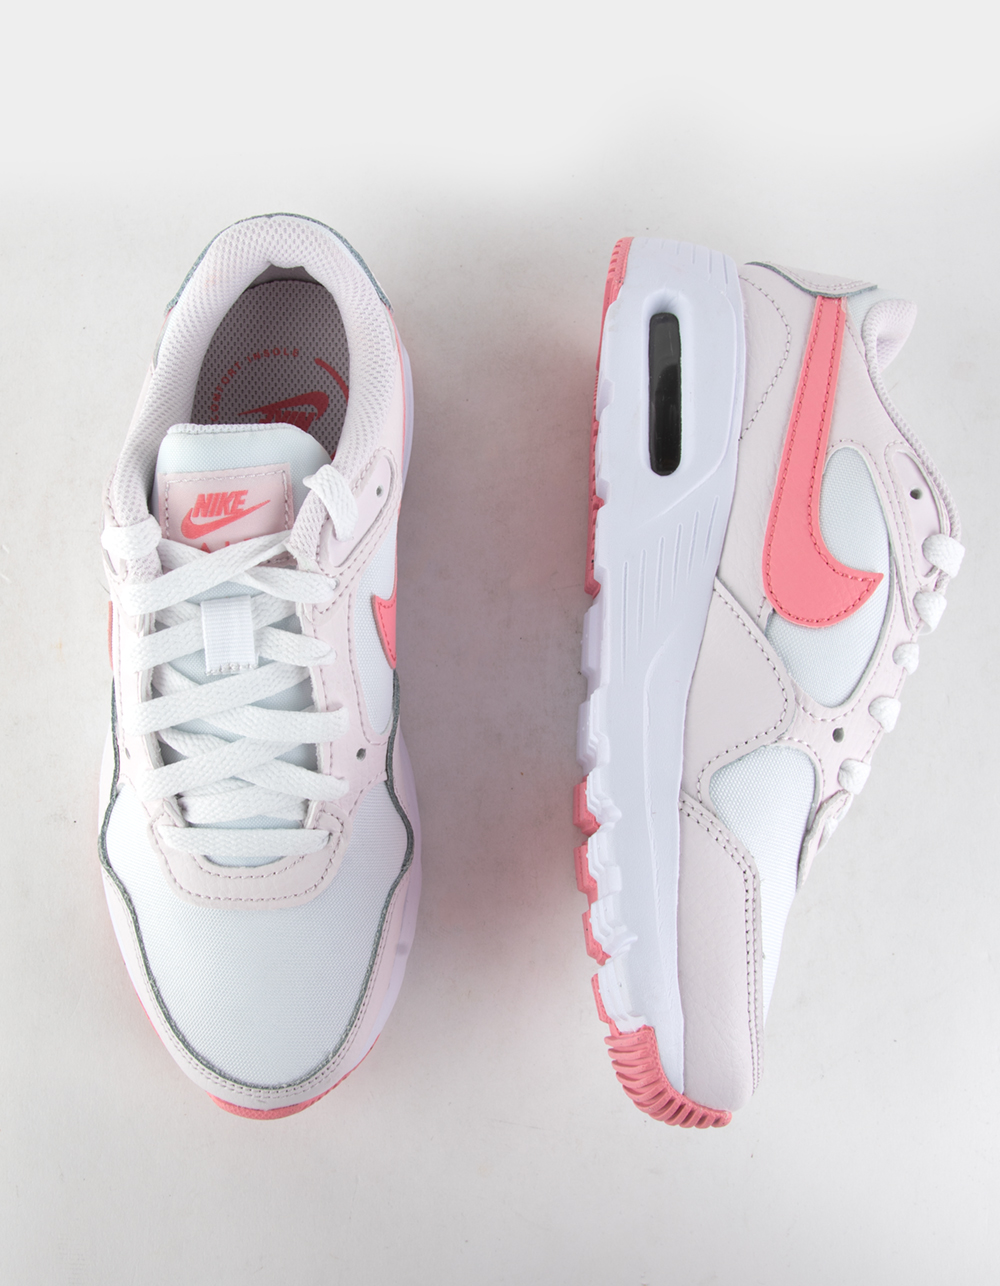 Nike Women's Air Max SC Shoes Pink Size 8.5 - $79 New With Tags